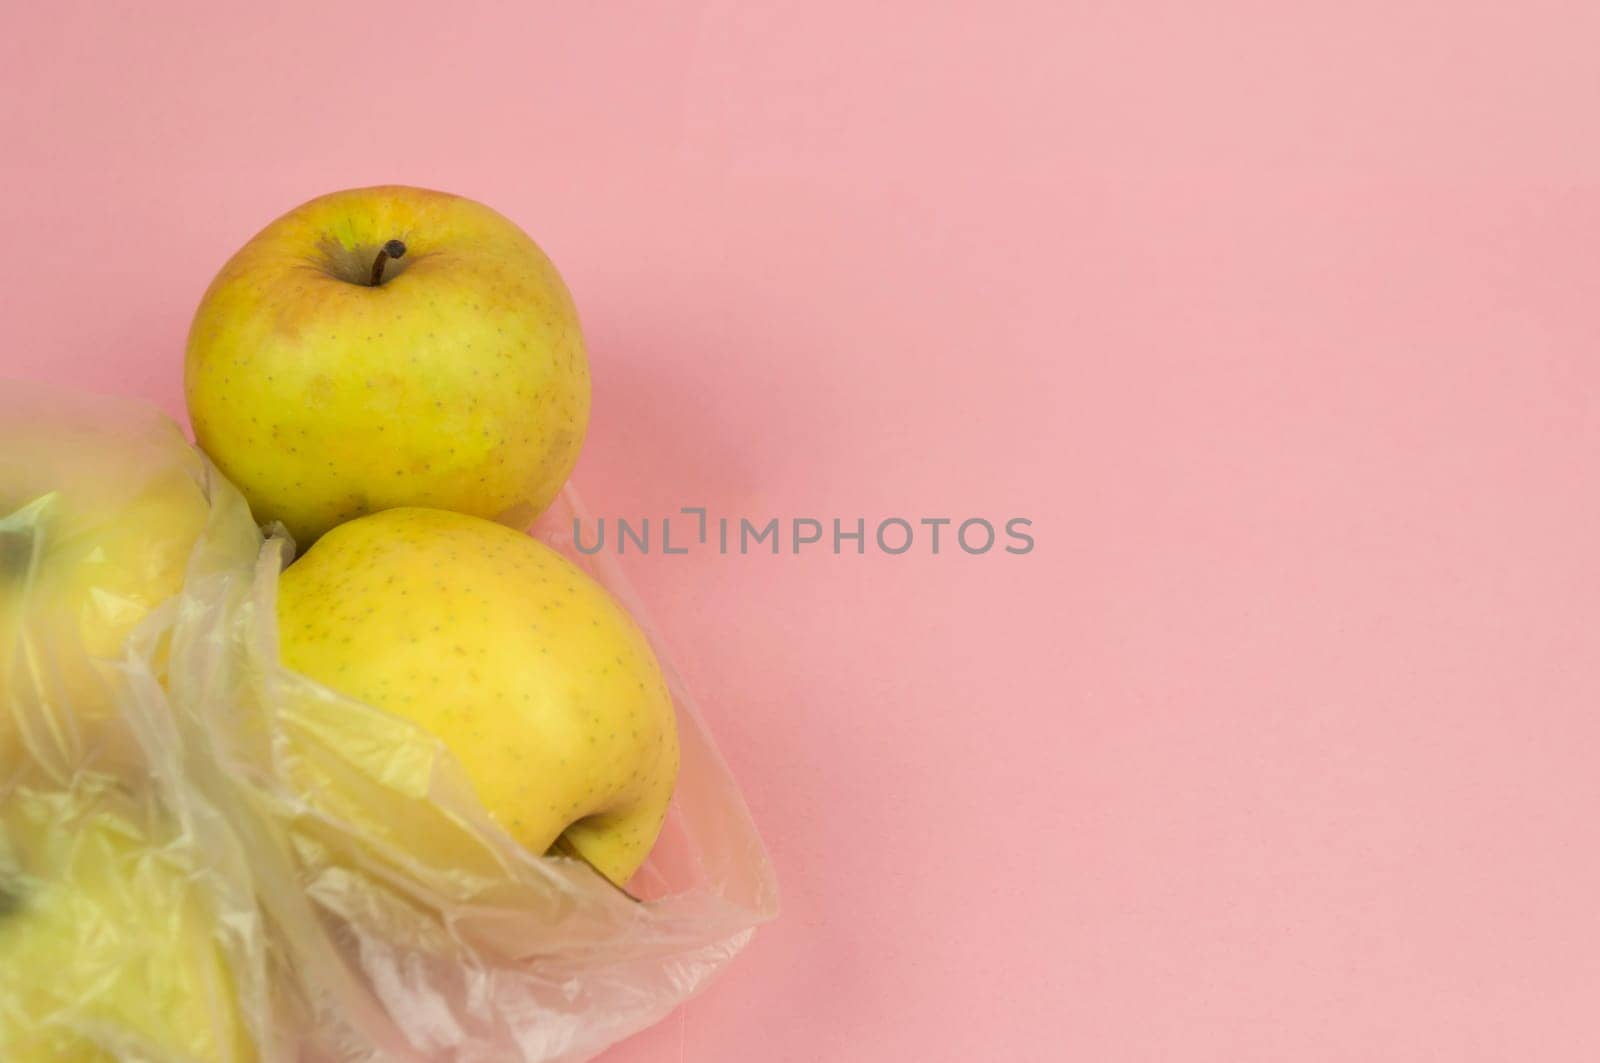 Three apples in a plastic bag on a pink background by Alla_Morozova93